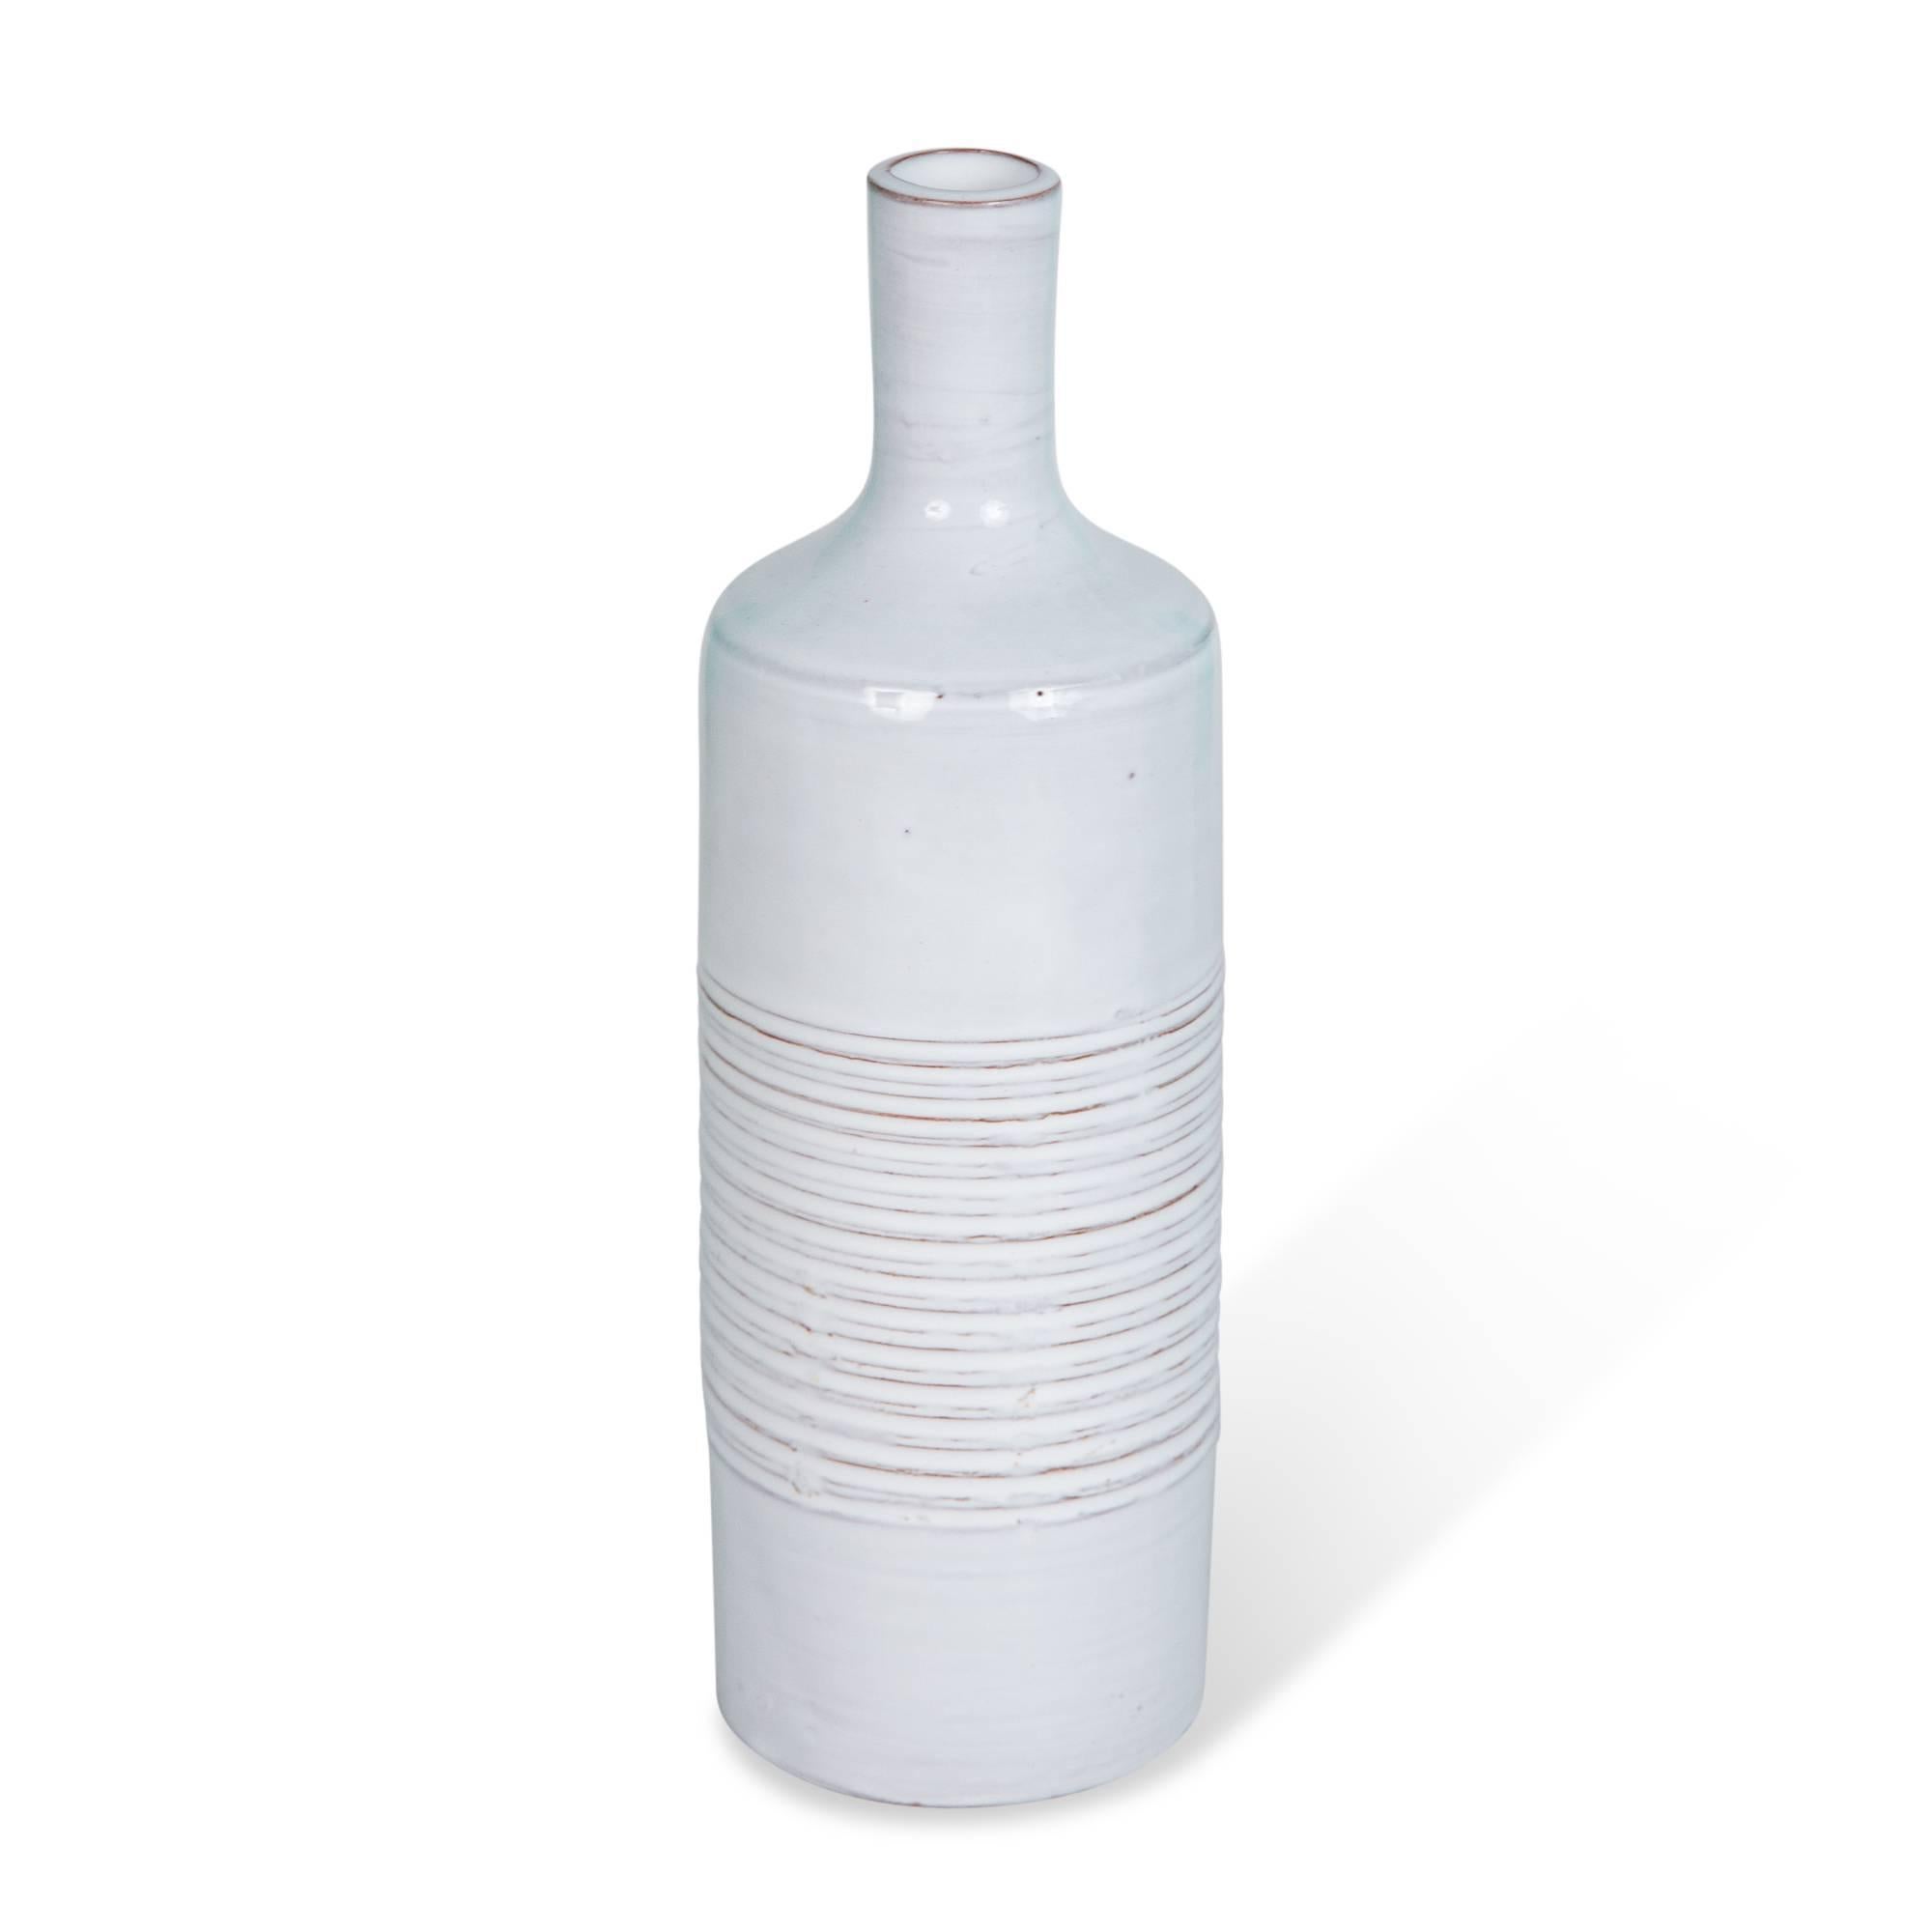 Grey-white bottle form ceramic vase, with long neck, and grooved bands in center of body, by Les Argonautes, France, 1950s. Measures: Height 9 in, diameter 2 3/4 in. (Item #5081).
  